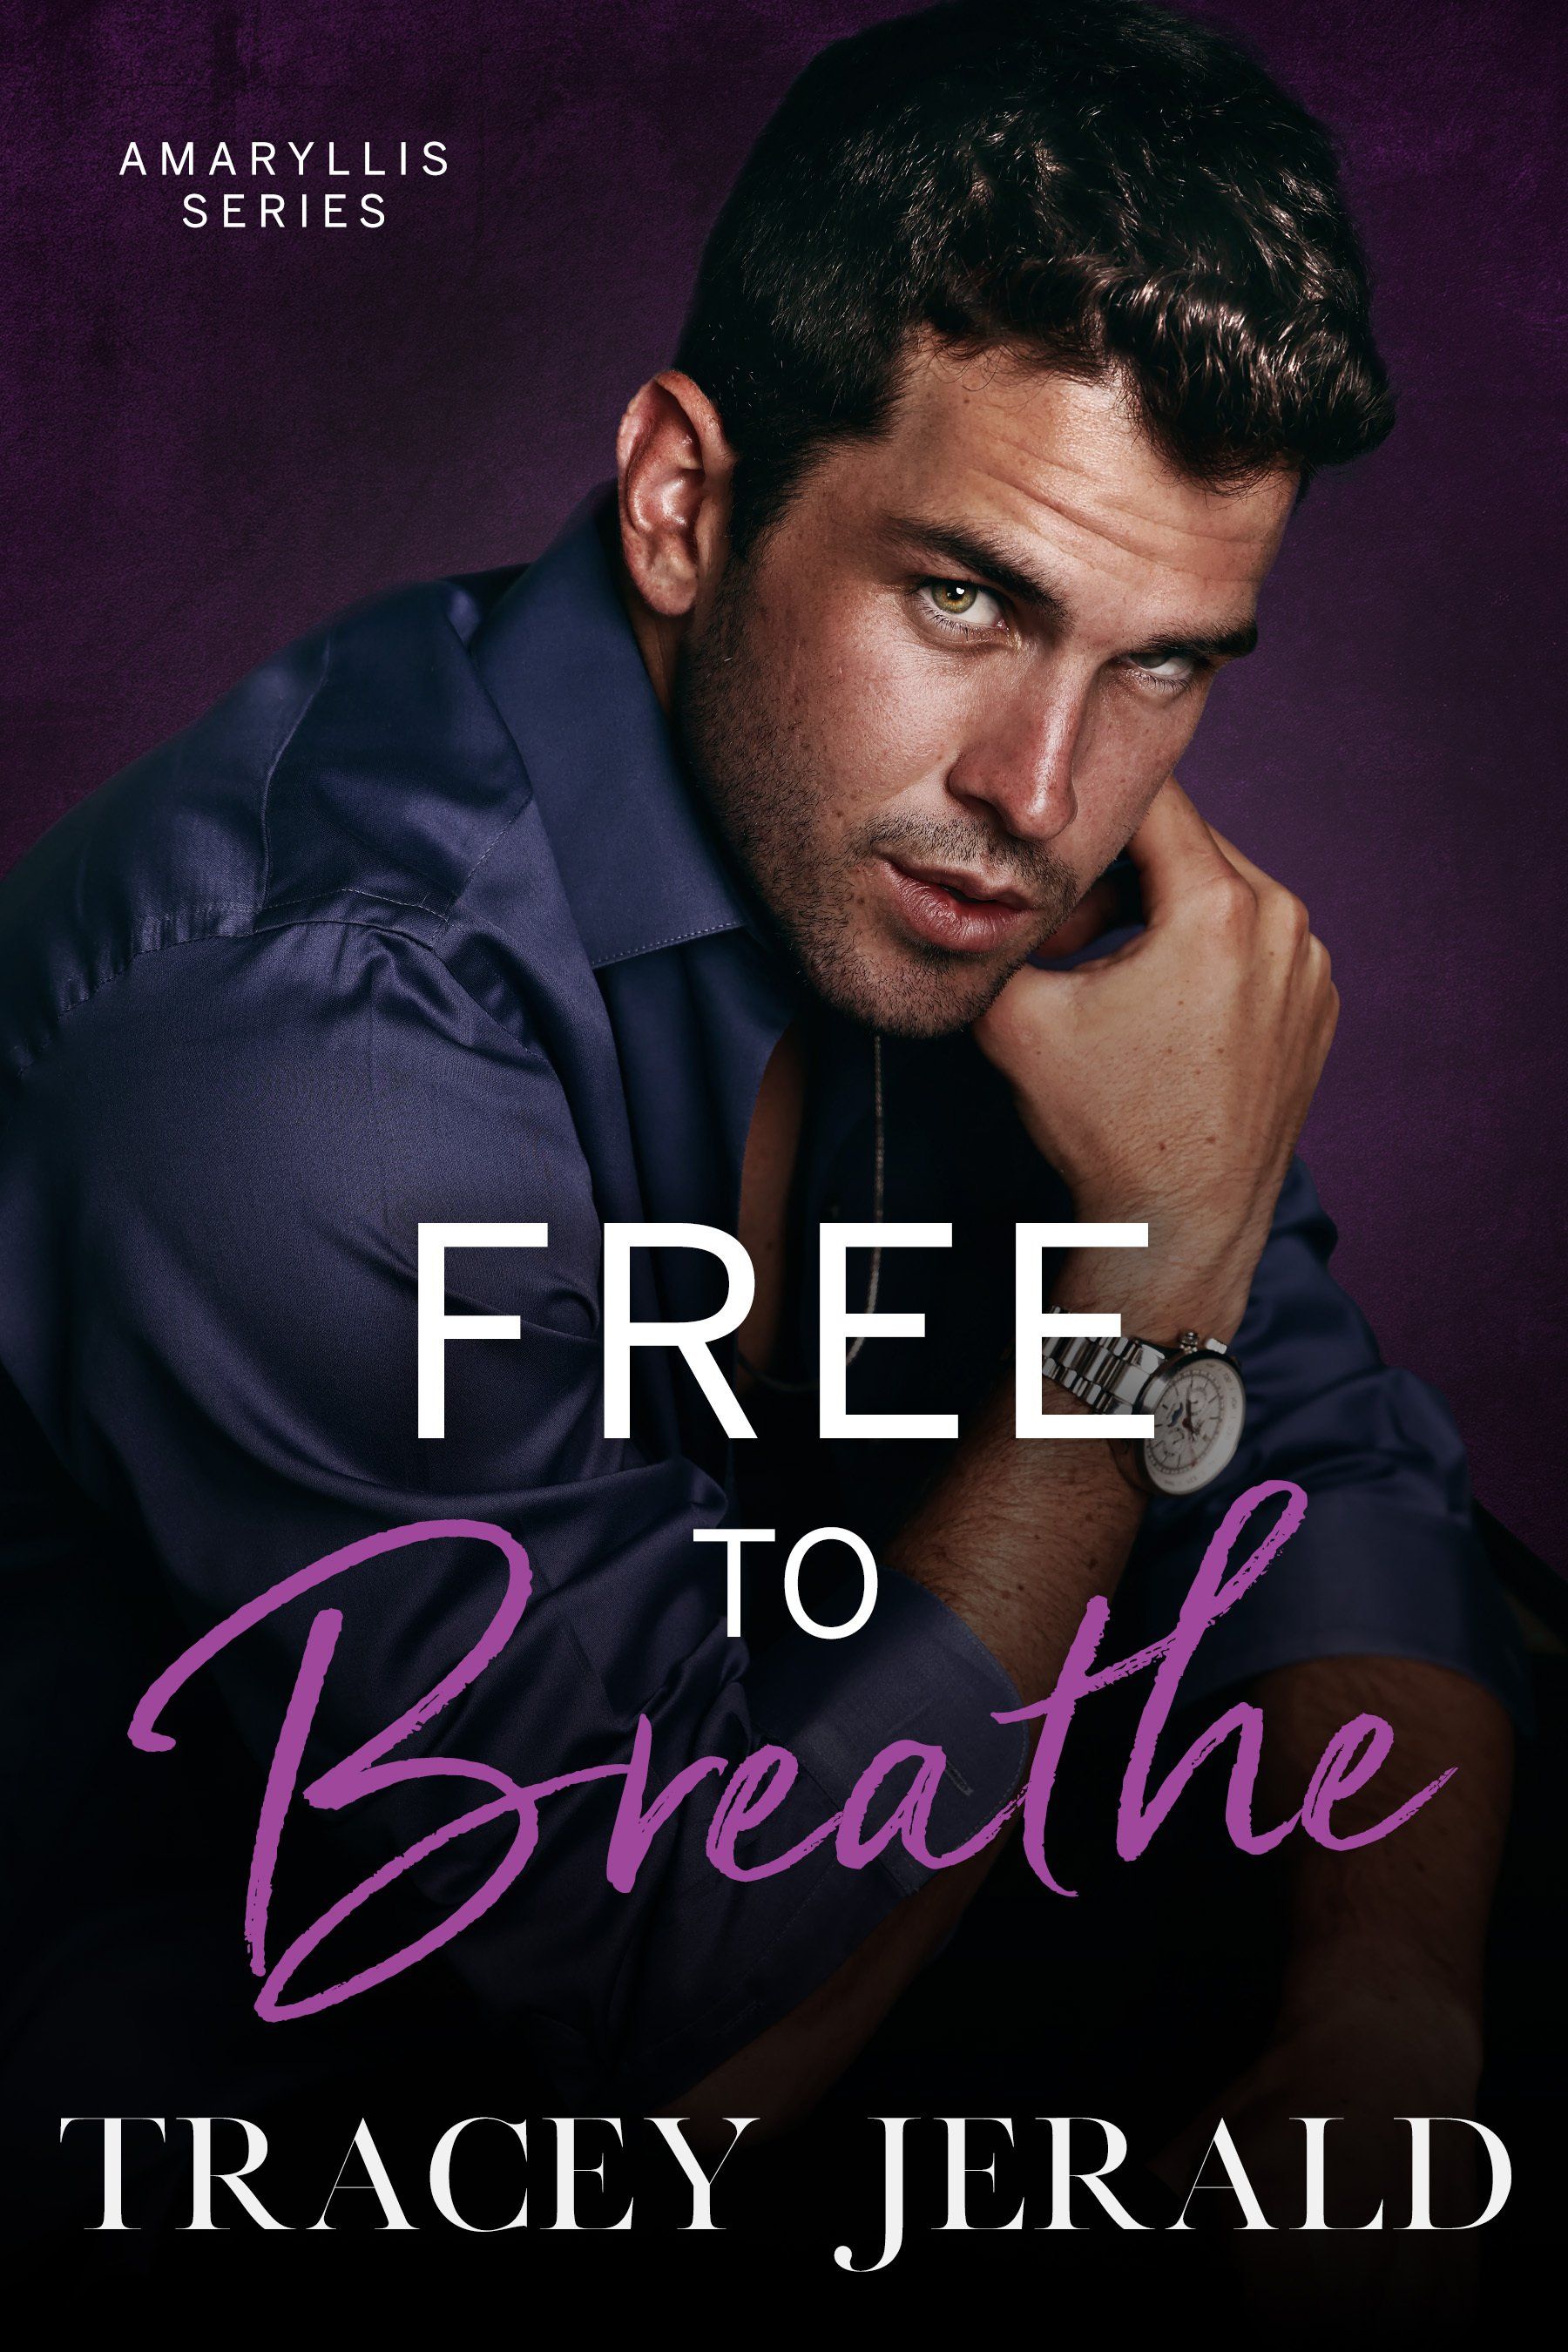 Free to Breathe, Tracey Jerald